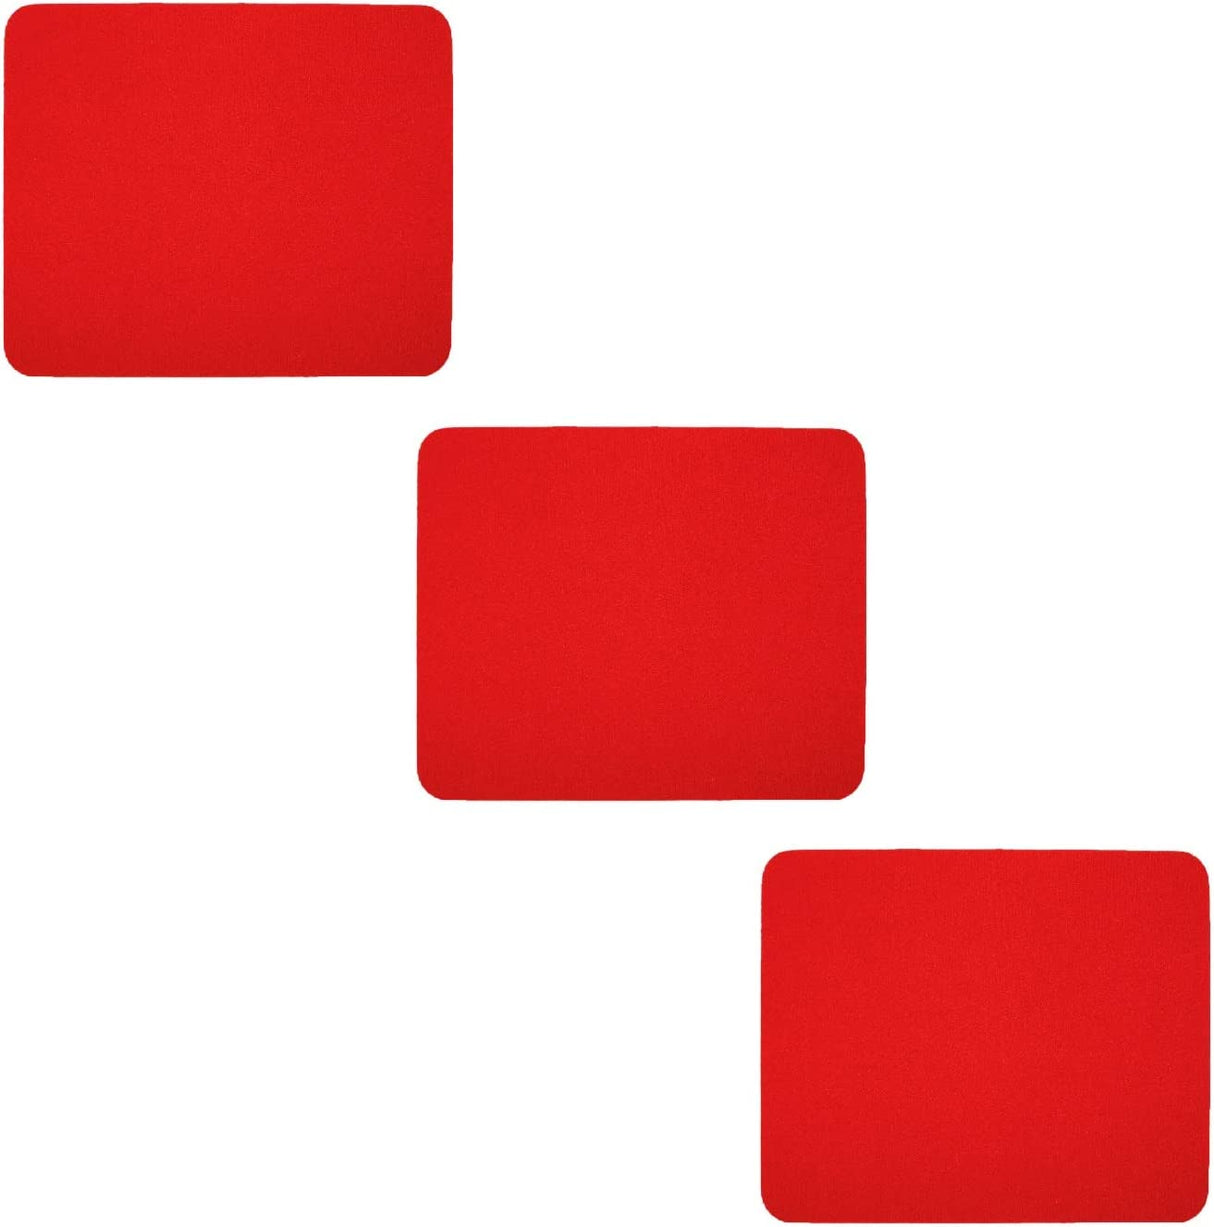 Belkin (F8E081-RED) Red Standard Mouse Pad - 3 Pack